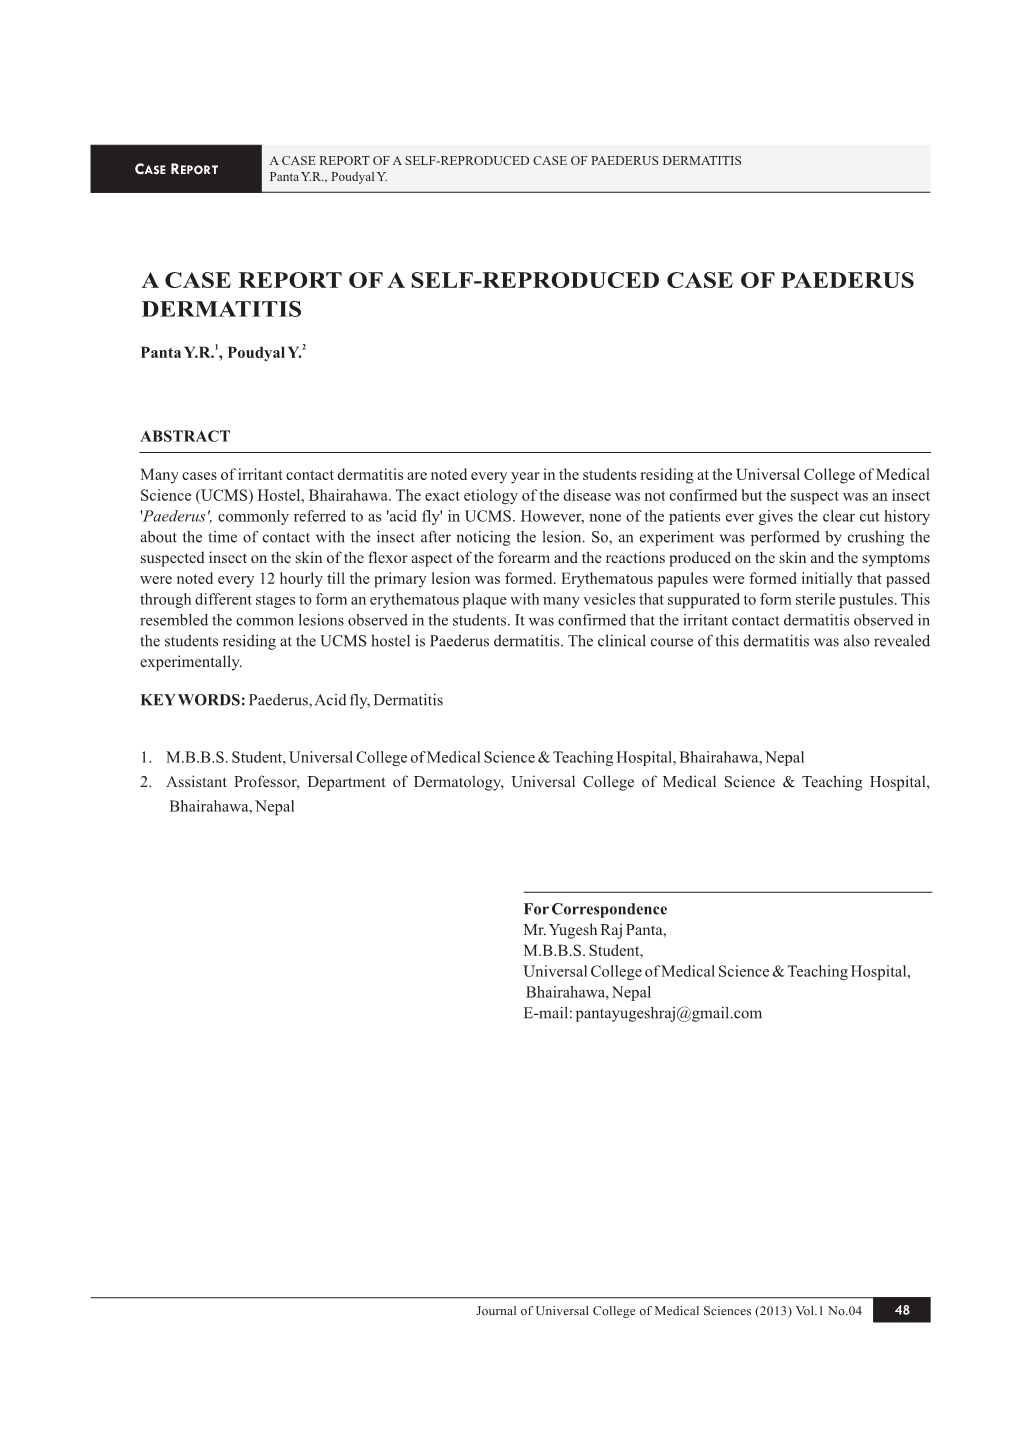 A CASE REPORT of a SELF-REPRODUCED CASE of PAEDERUS DERMATITIS ASE EPORT C R Pantay.R., Poudyaly